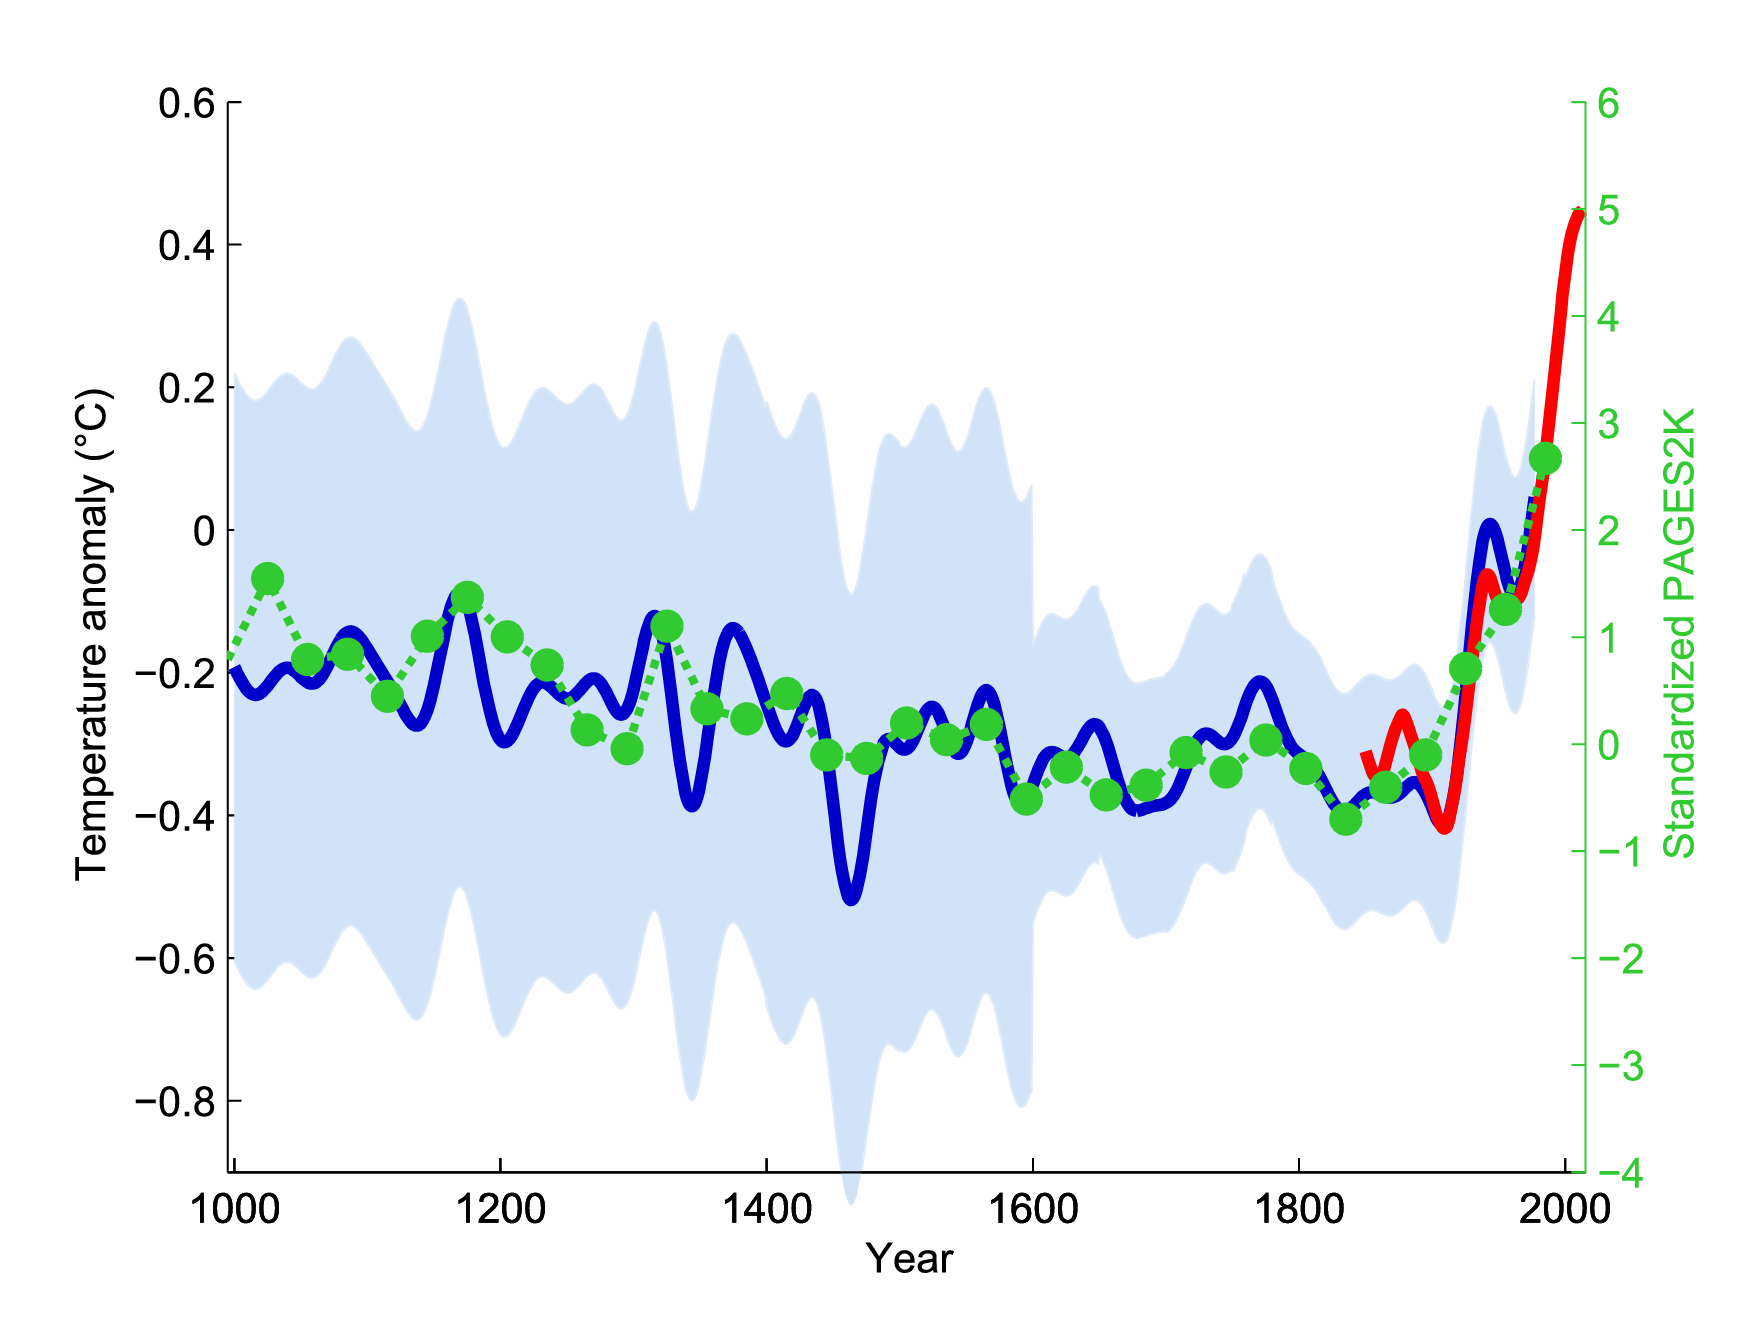 The original northern hemisphere “hockey stick” graph of Mann, Bradley, and Hughes, 1999. Green dots show the 30-year average of the new PAGES 2k reconstruction. The red curve shows the global mean temperature, according HadCRUT4 data from 1850 to 2013. In blue is the original hockey stick of Mann, Bradley and Hughes (1999) with its uncertainty range (light blue). Graph: Klaus Bitterman